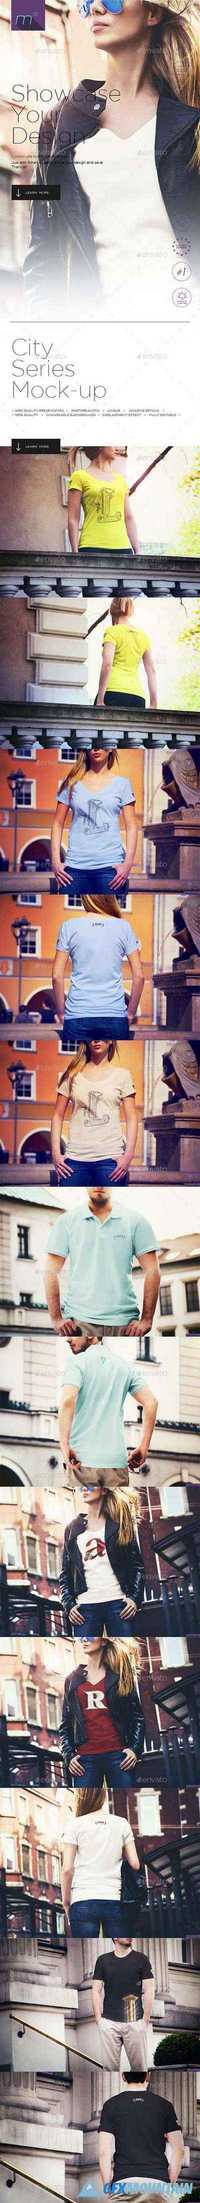 GraphicRiver - City Series T-shirt Mock-up 12264936